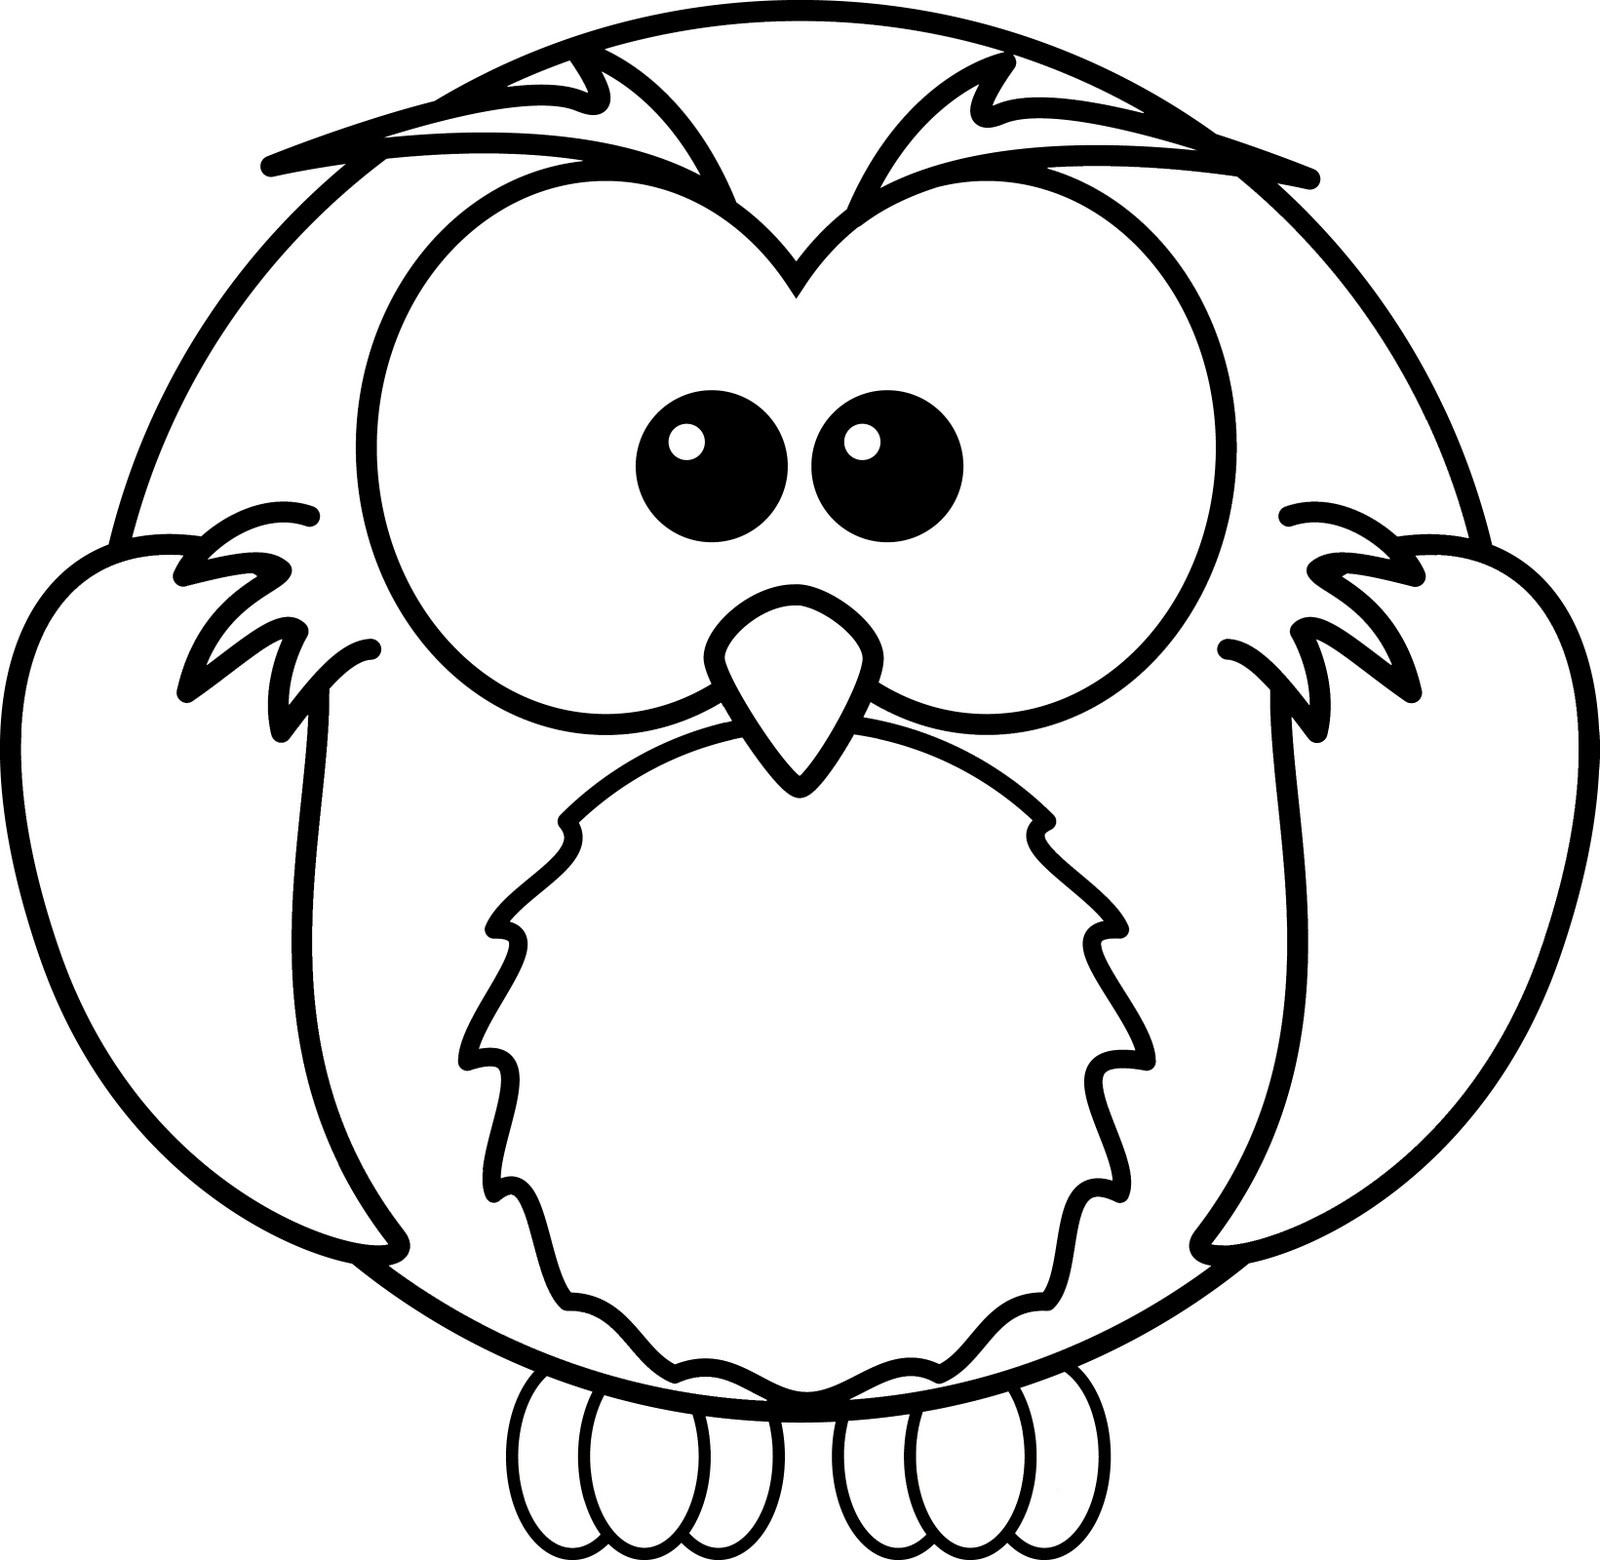 Owl Coloring Pages Printable
 Baby Owls Coloring Sheet To Print